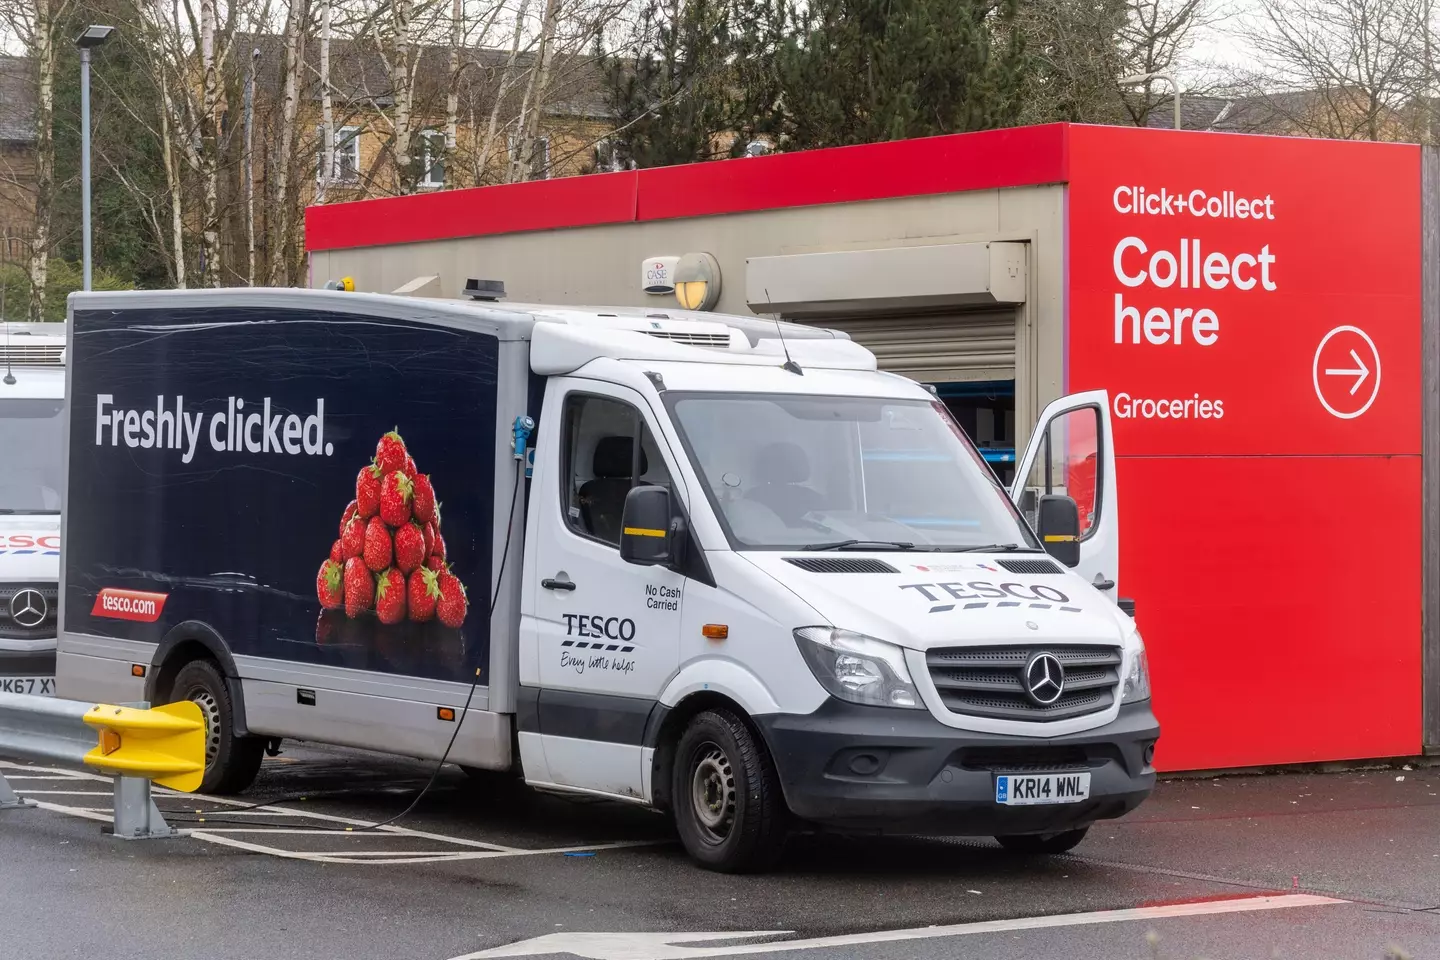 Tesco wants customers to join its membership schemes.